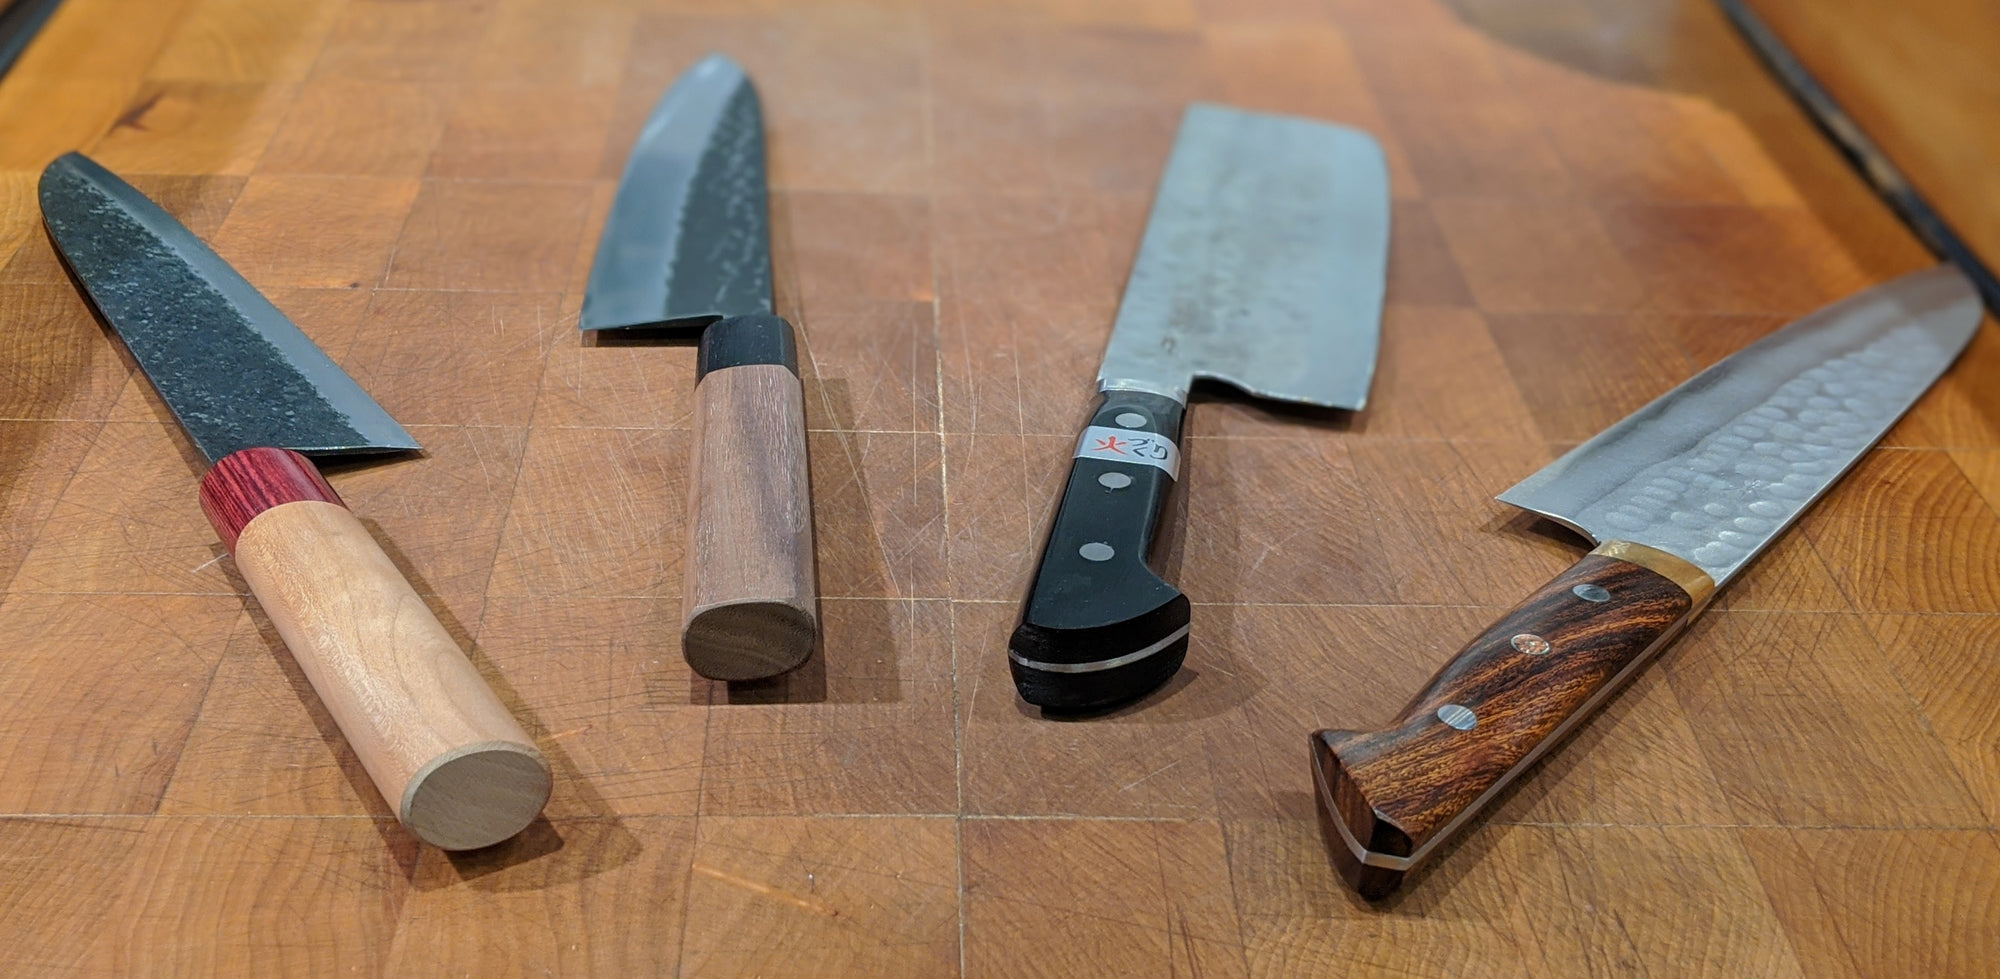 Japanese Knife Handles v.s. Western Knife Handles: What’s the Difference?